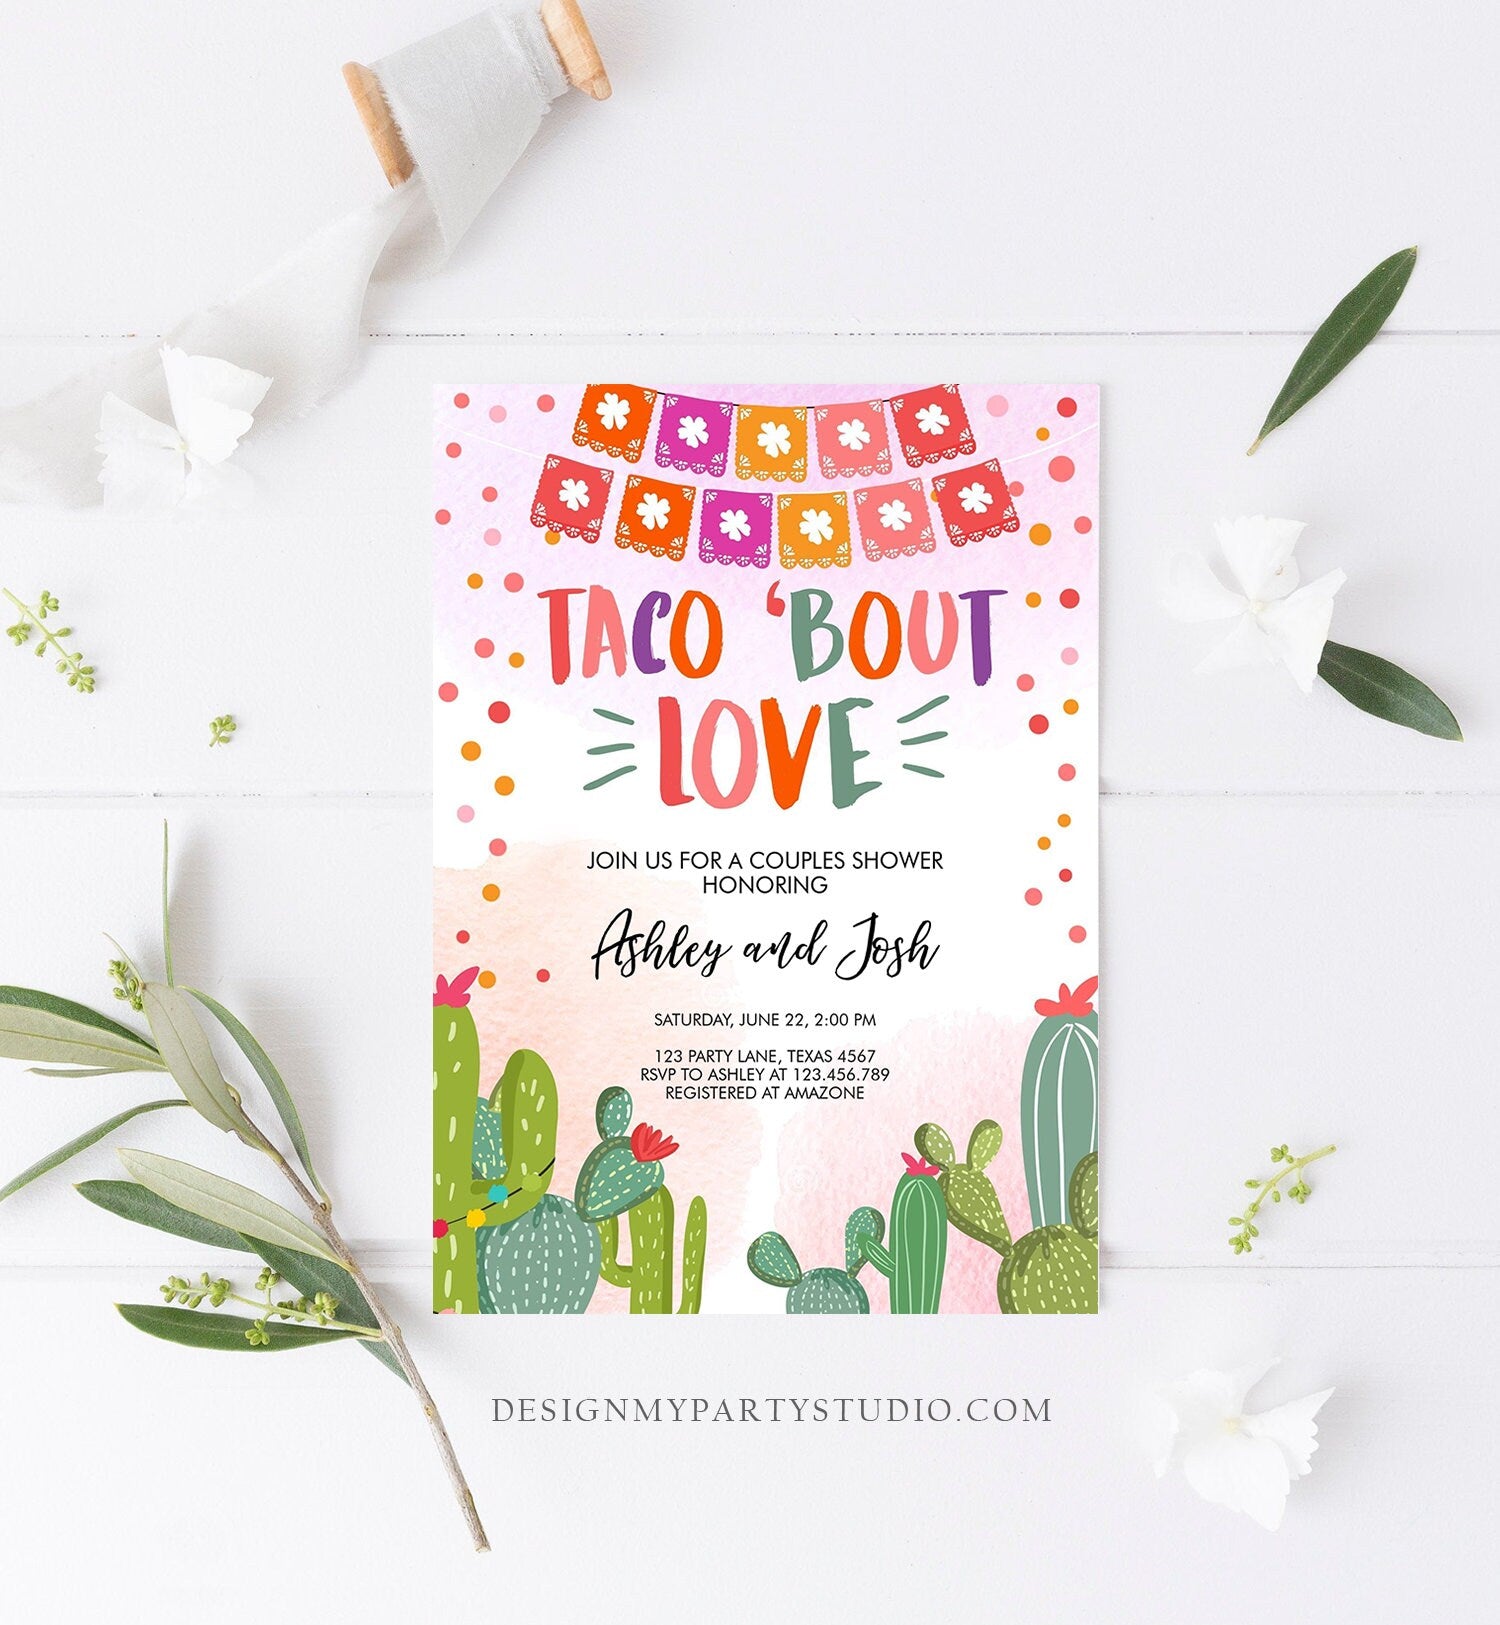 Editable Taco Bout Love Couples Shower Invitation Fiesta Cactus Succulent Mexican Green Pink Digital Download Corjl Template Printable 0135